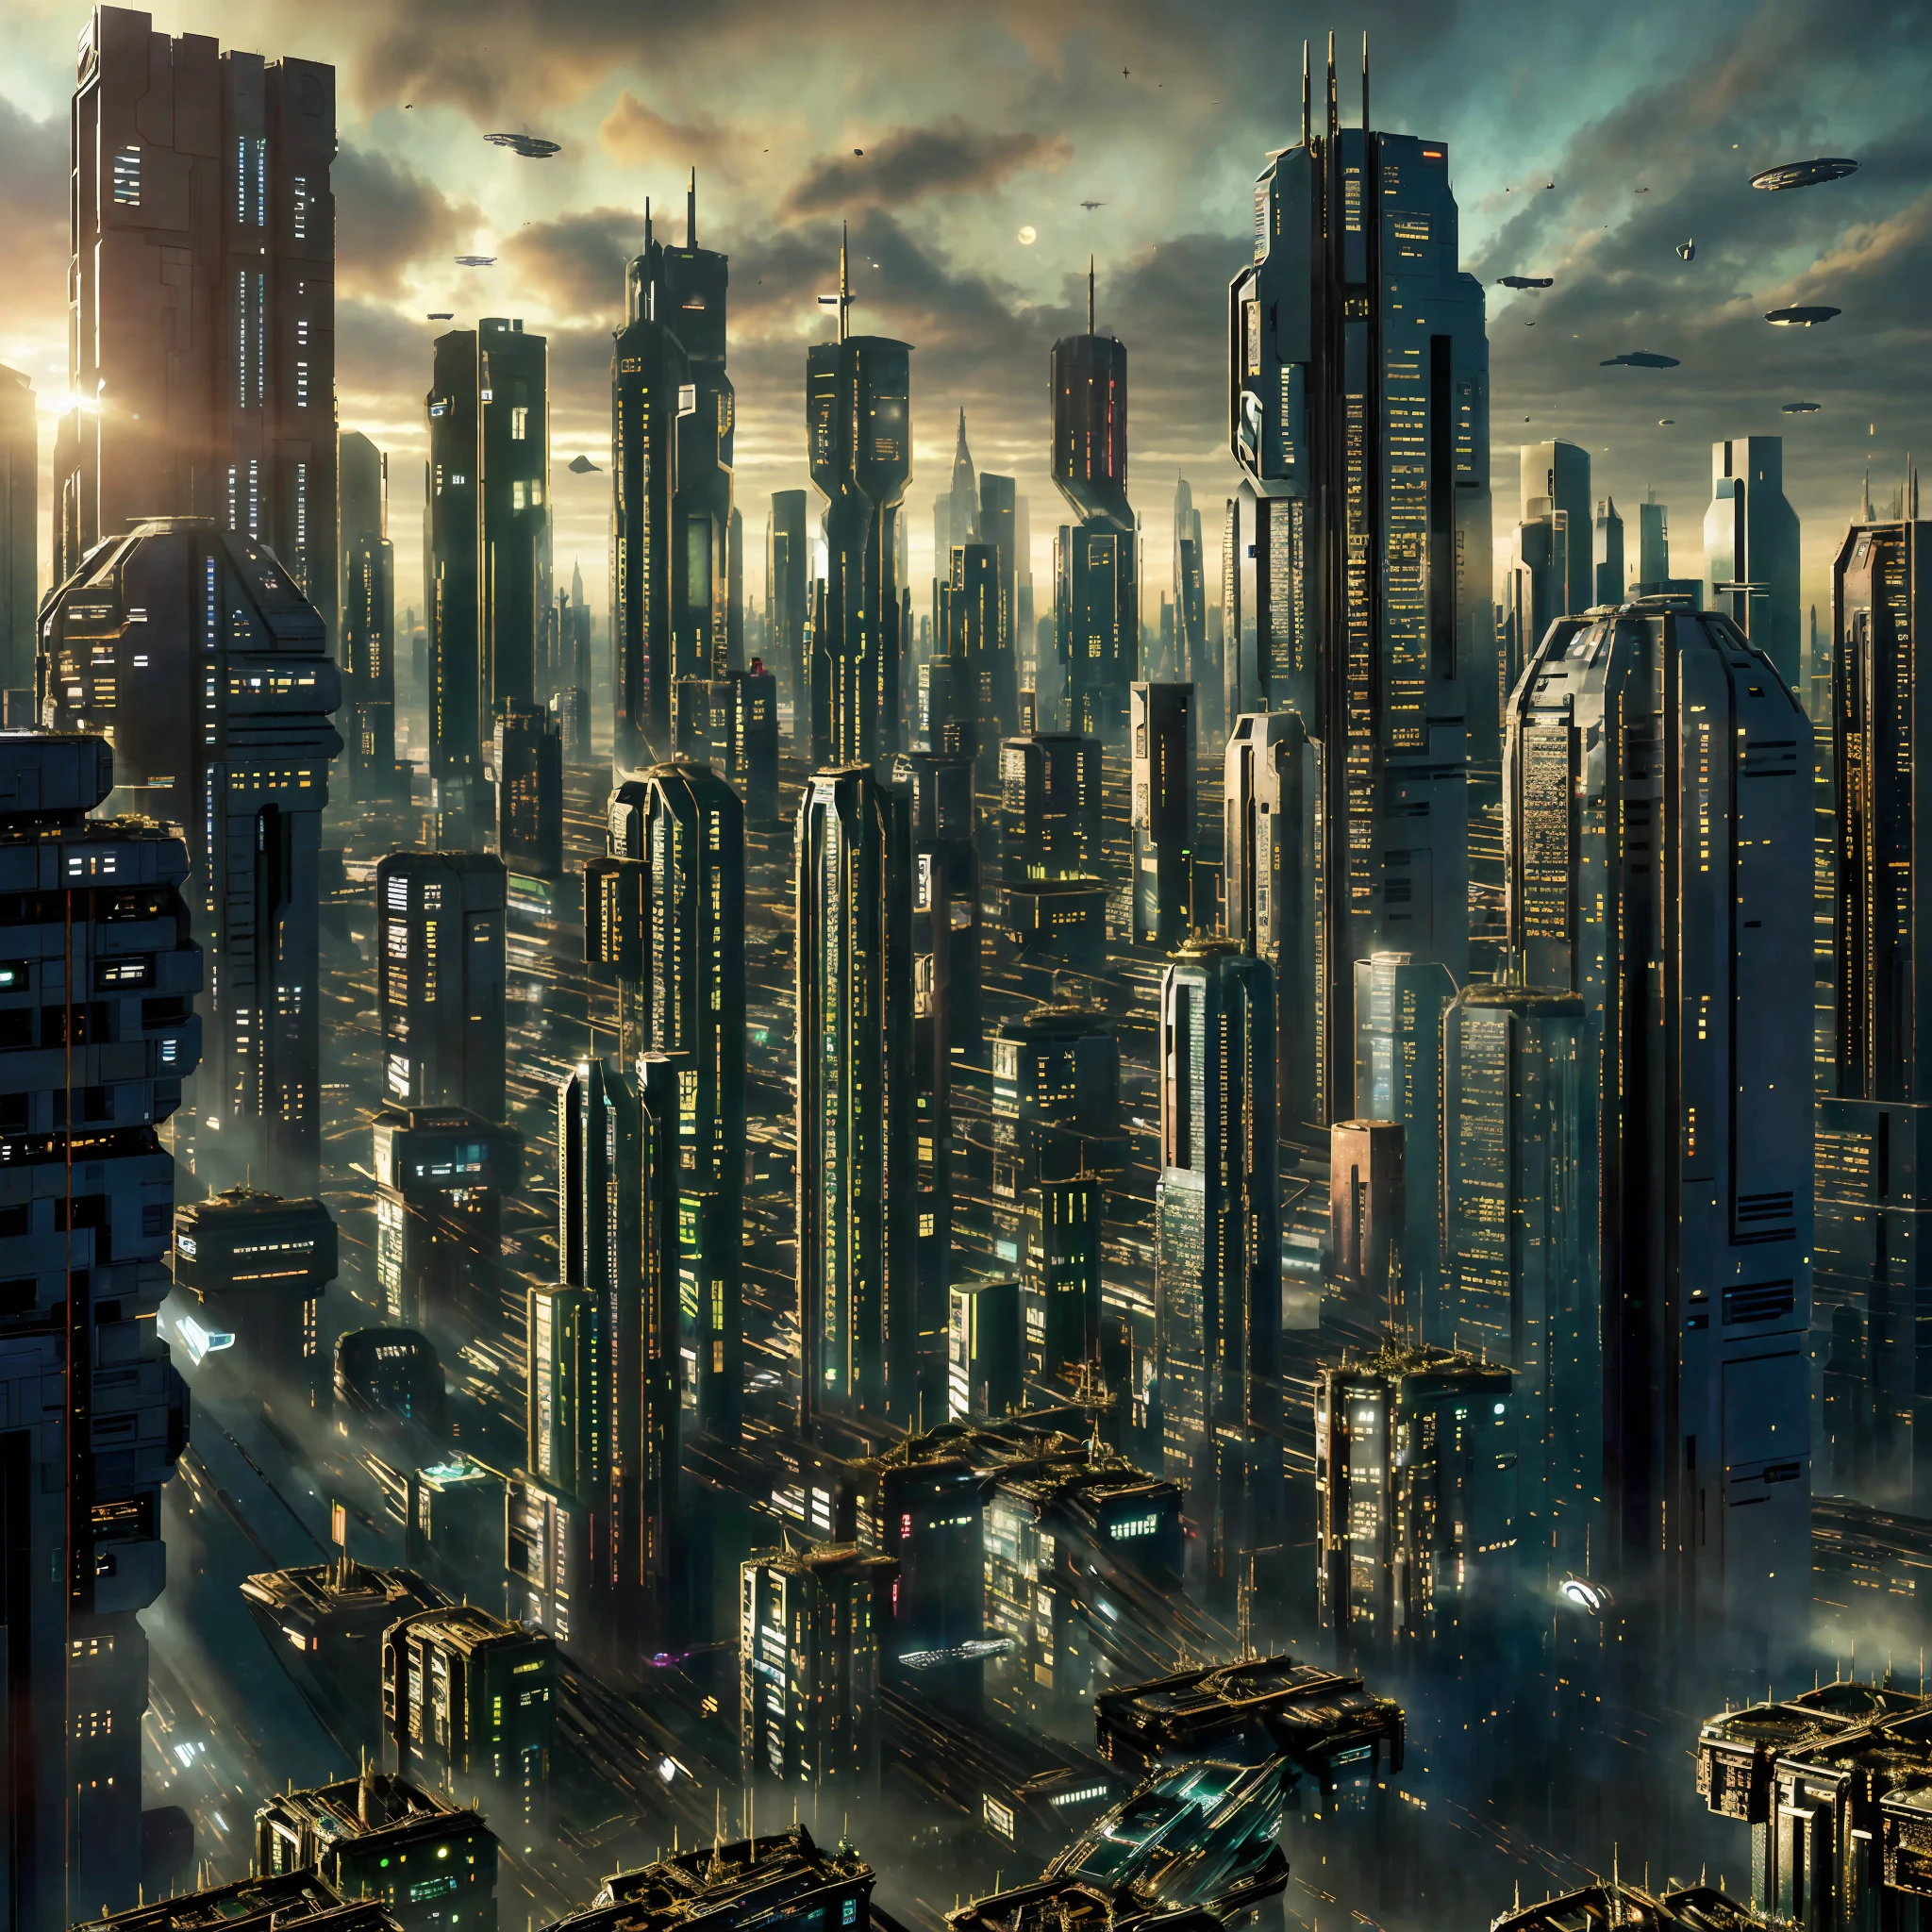 ((a cityscape view of a futuristic sci fi mega sprawling city)), ominous, dystopian city, masterpiece, 4k resolution, (flawless architecture), atmospheric, nature taking over city,